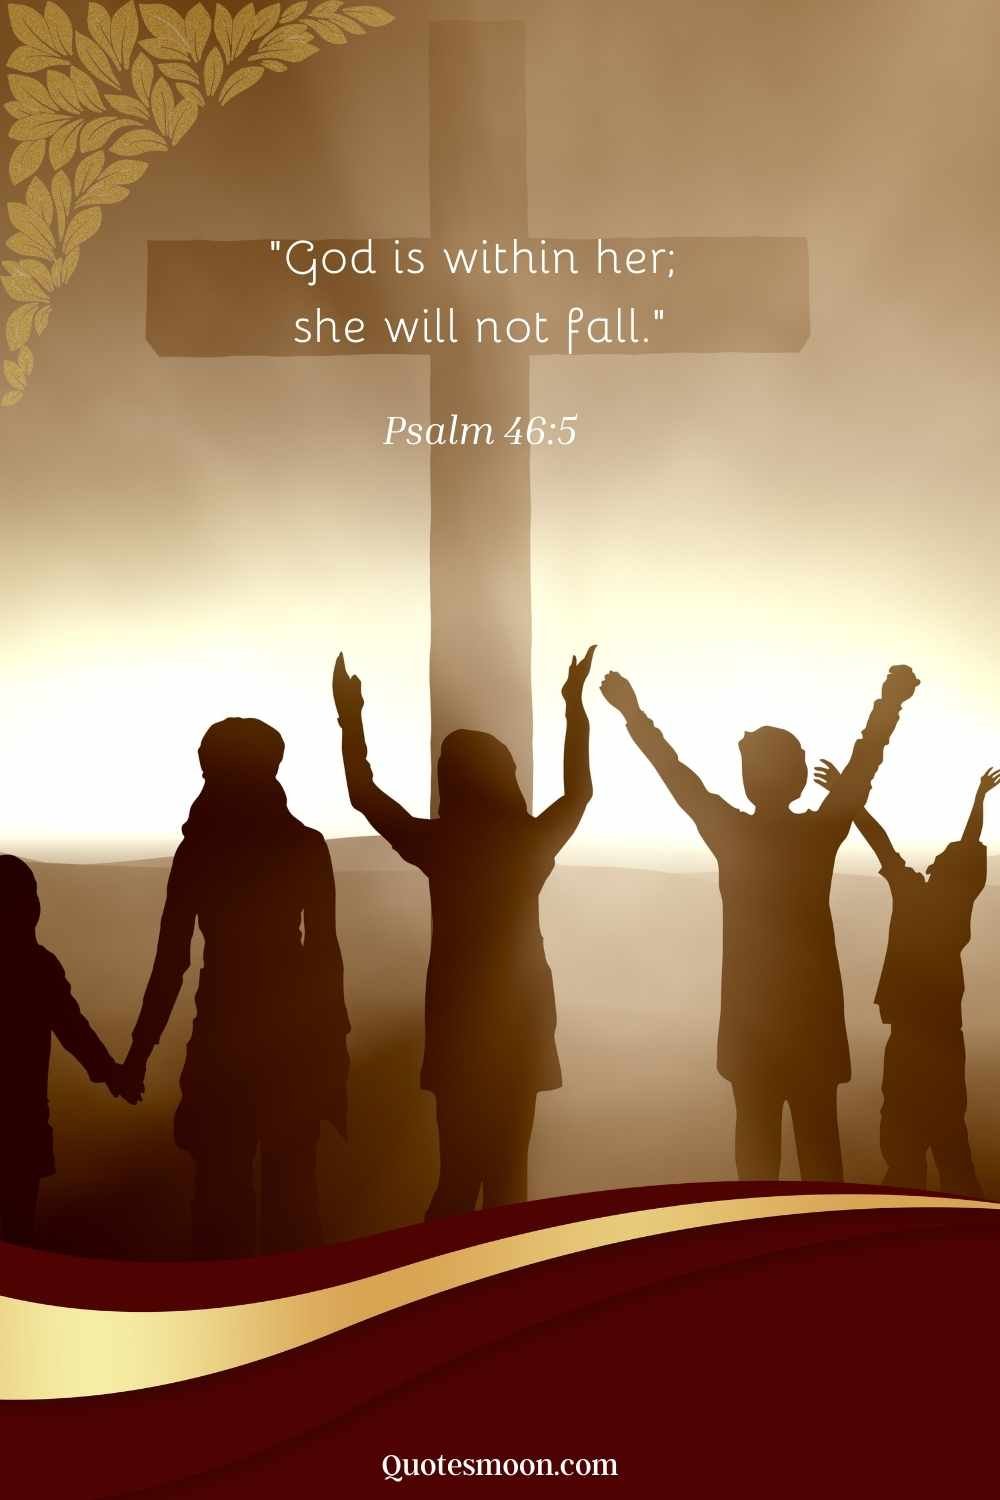 real christian women powerful bible verse images